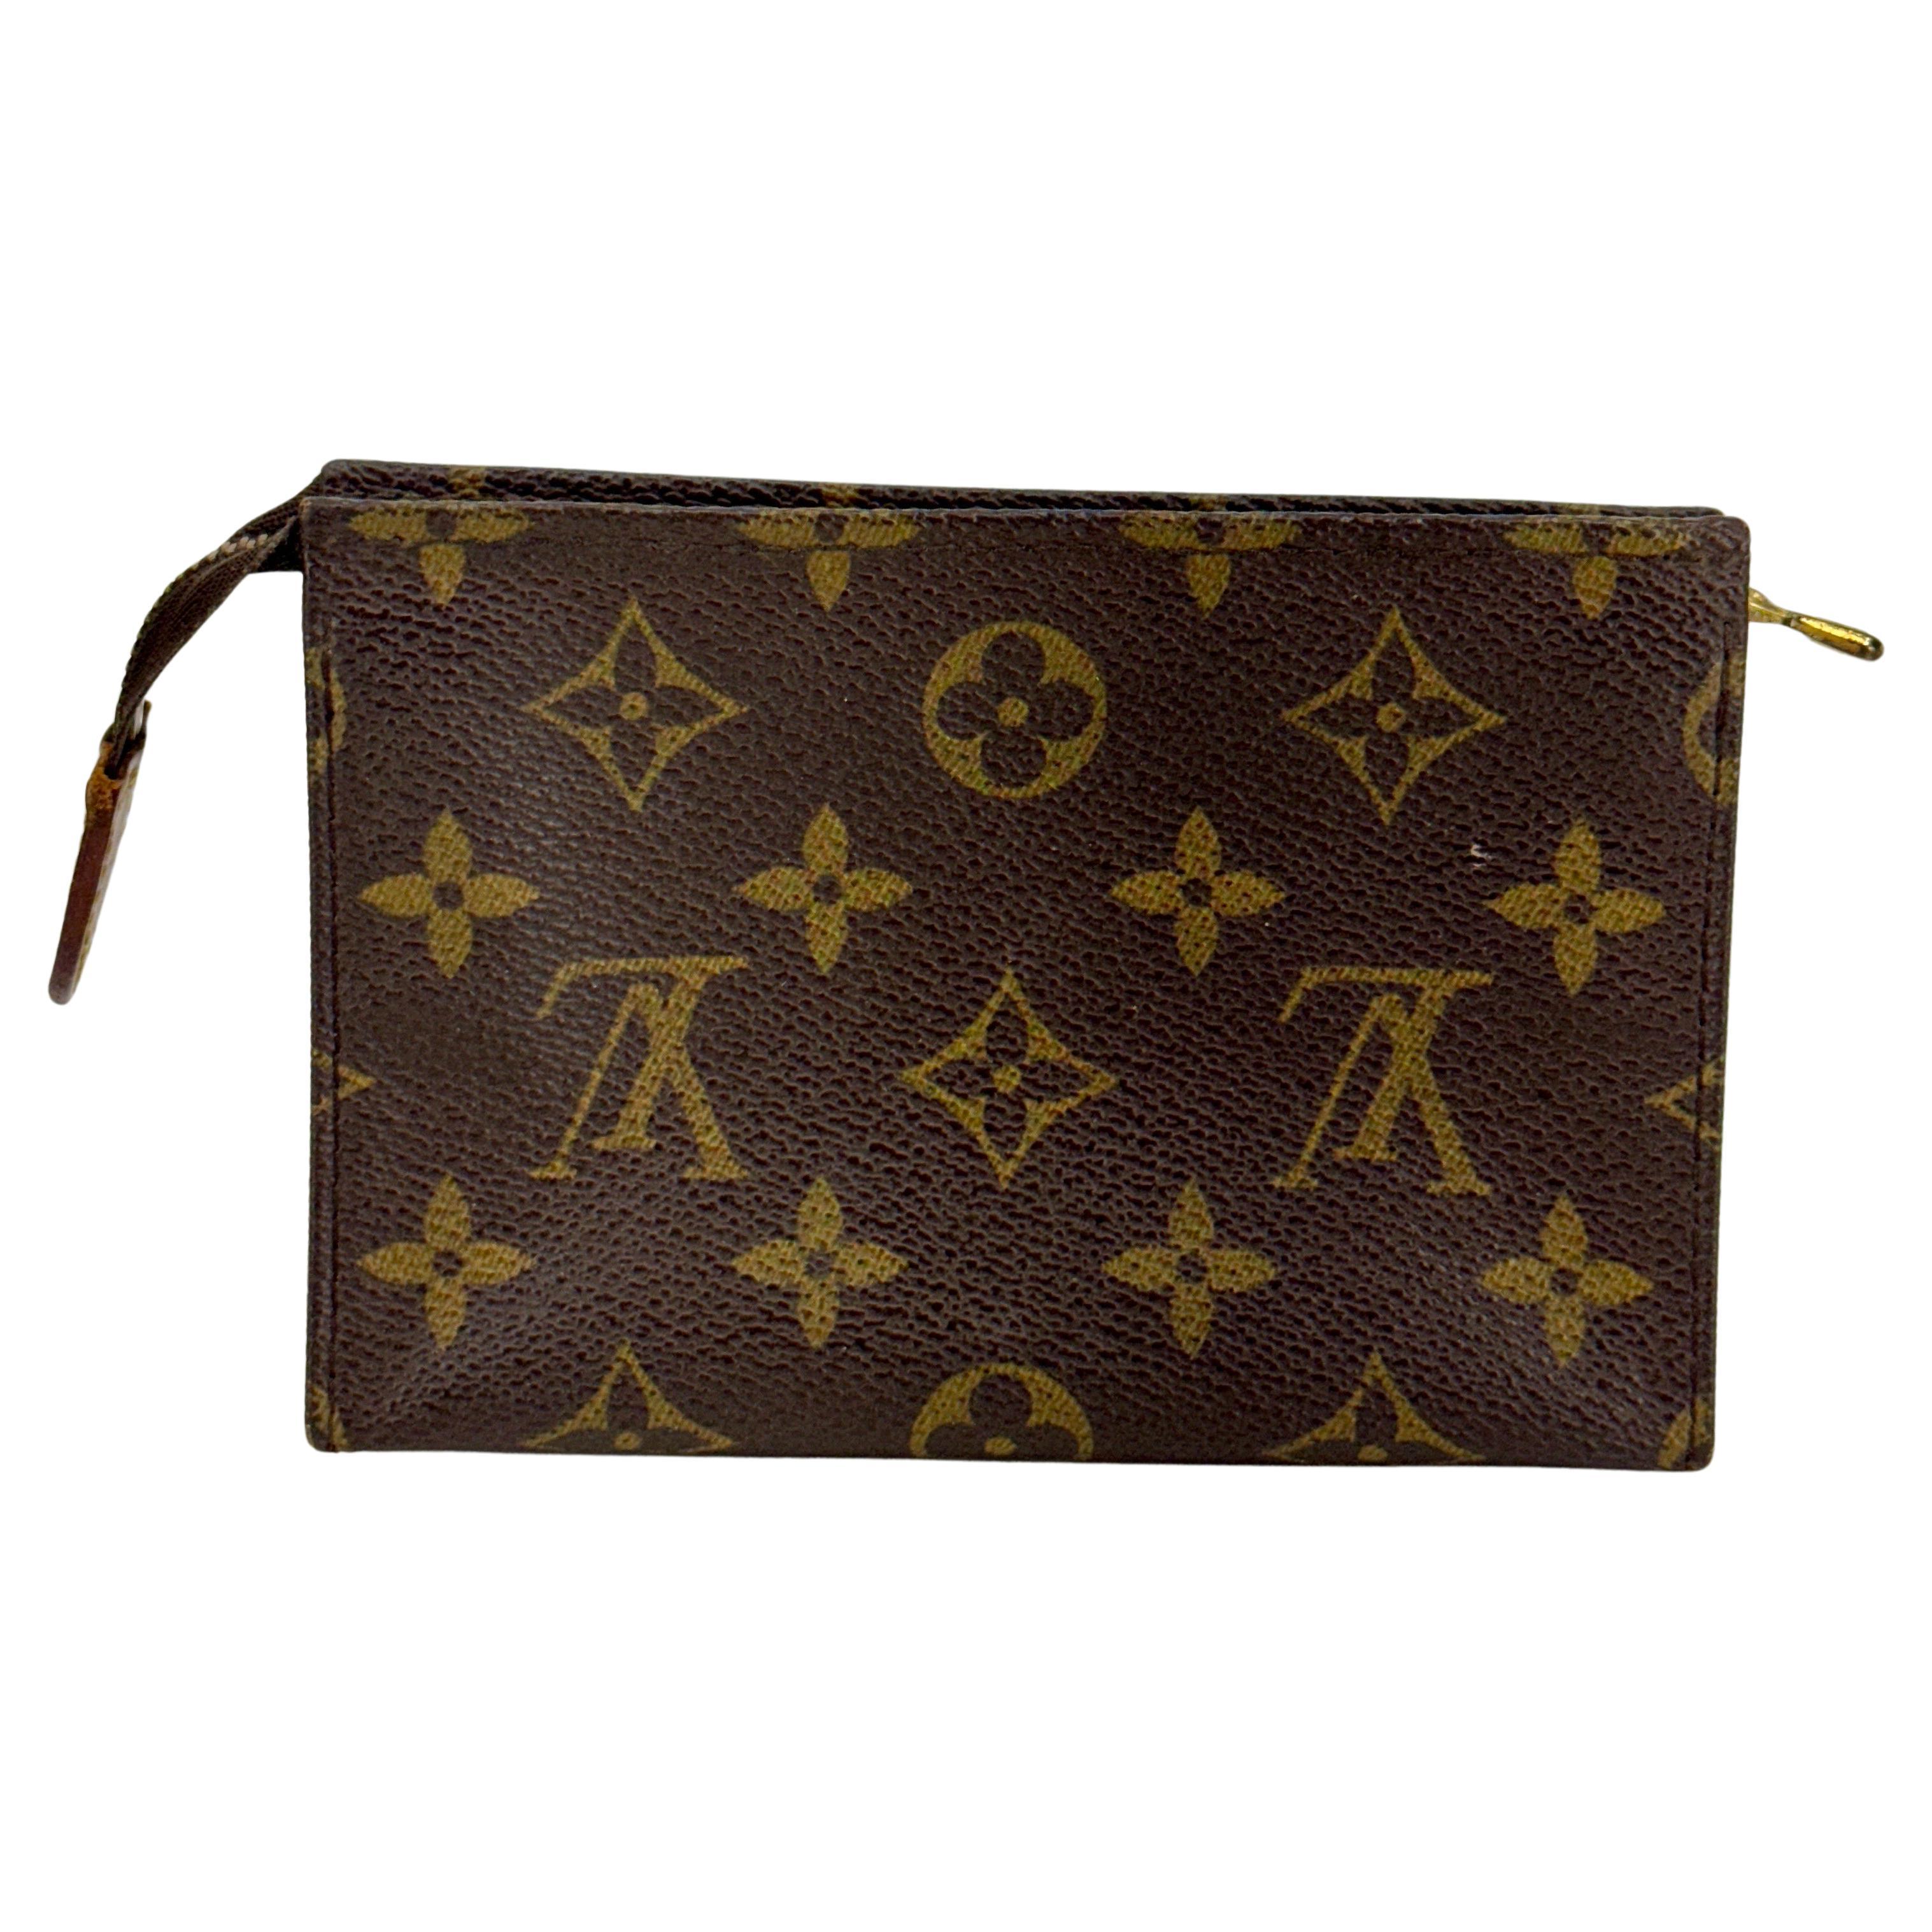 Monogram LV Toiletry Pochette Pouch 15 Date Code 881 TH, France

Authentic LOUIS VUITTON LV Monogram Toiletry Pouch 15. This cosmetic/ lipstick pouch or small carry-all is crafted of classic Louis Vuitton monogram coated canvas in brown. The pouch